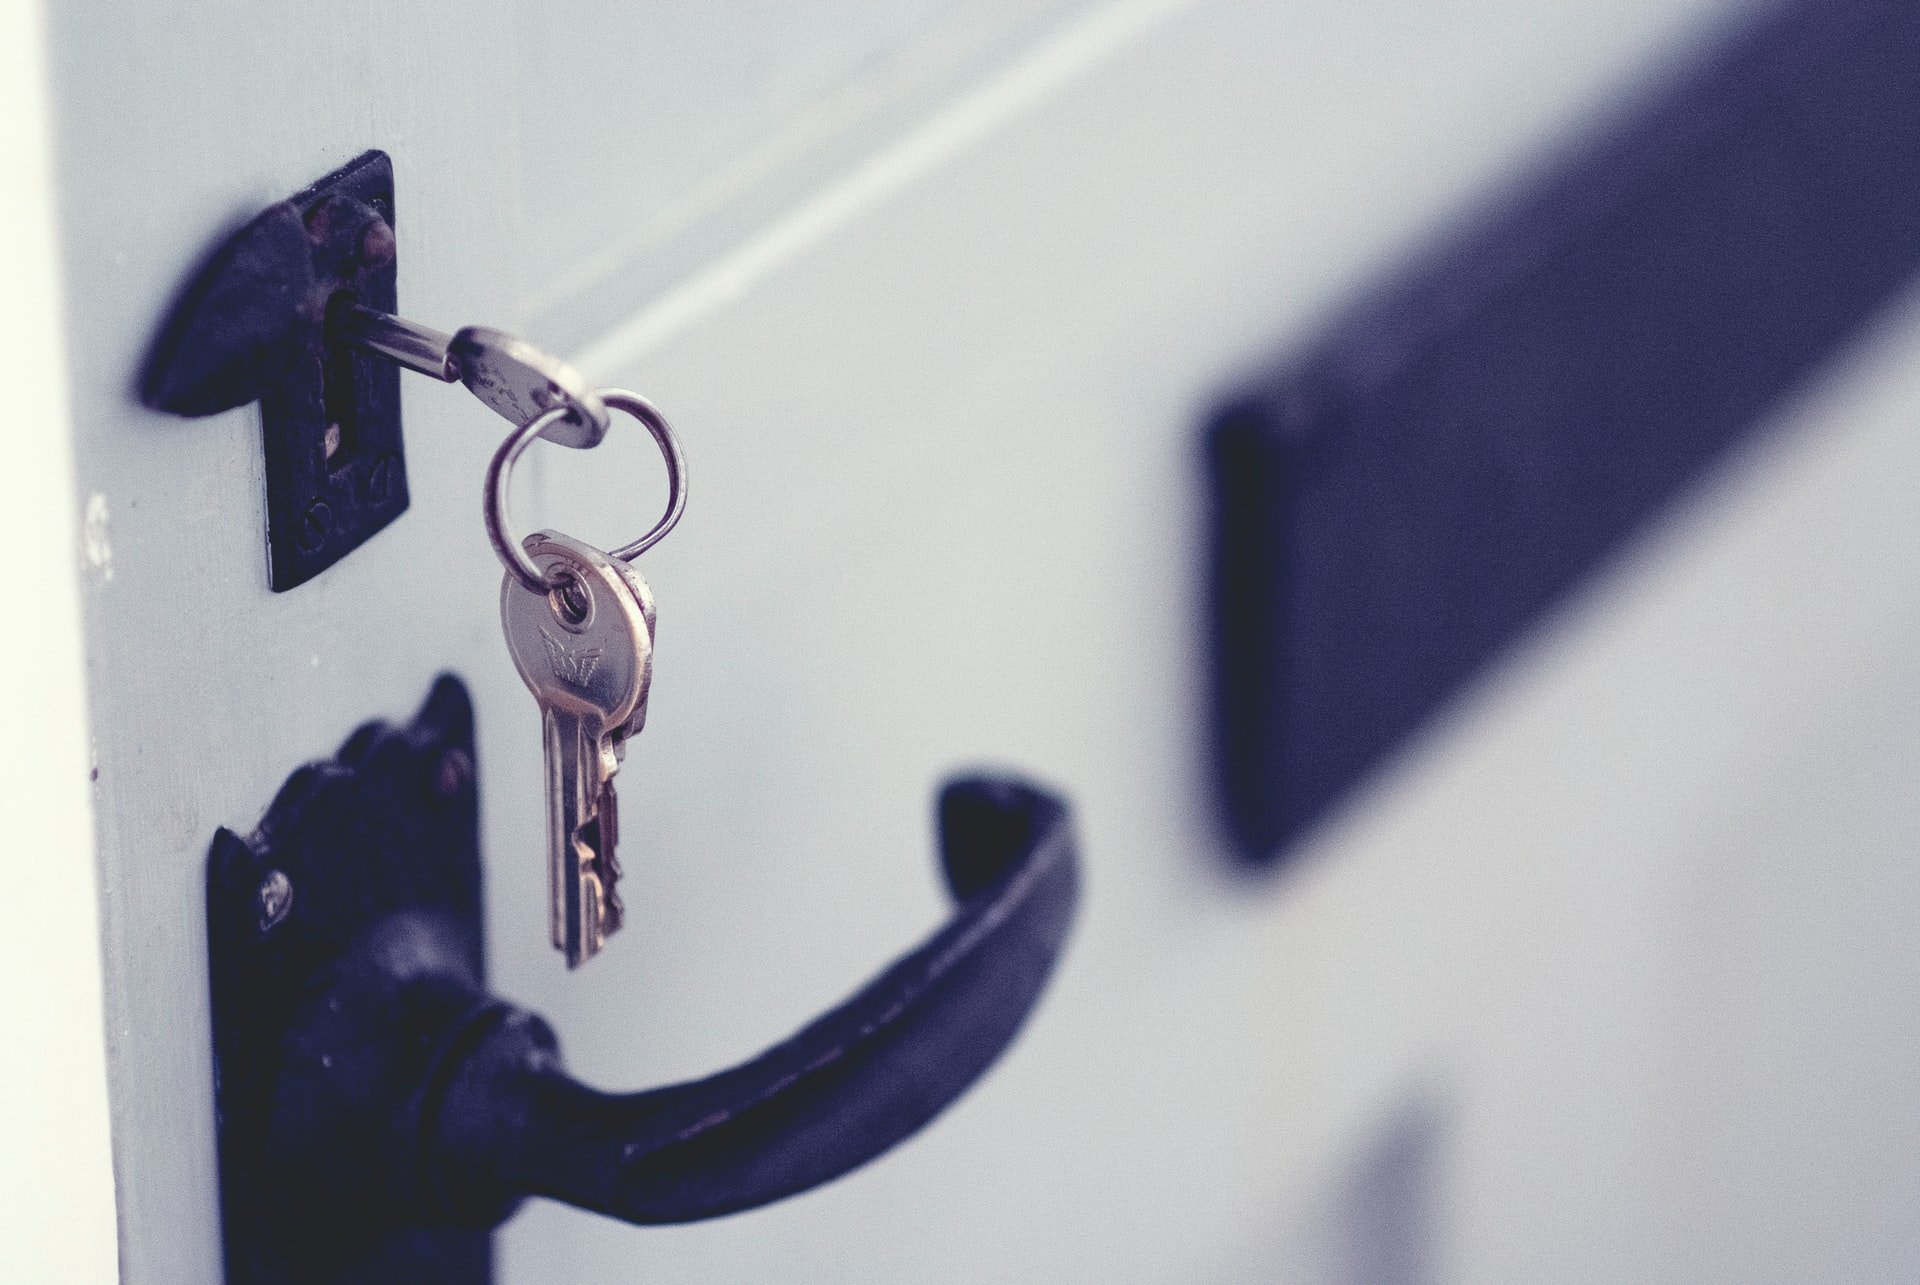 OP's mother-in-law wanted a spare key | Source: Unsplash